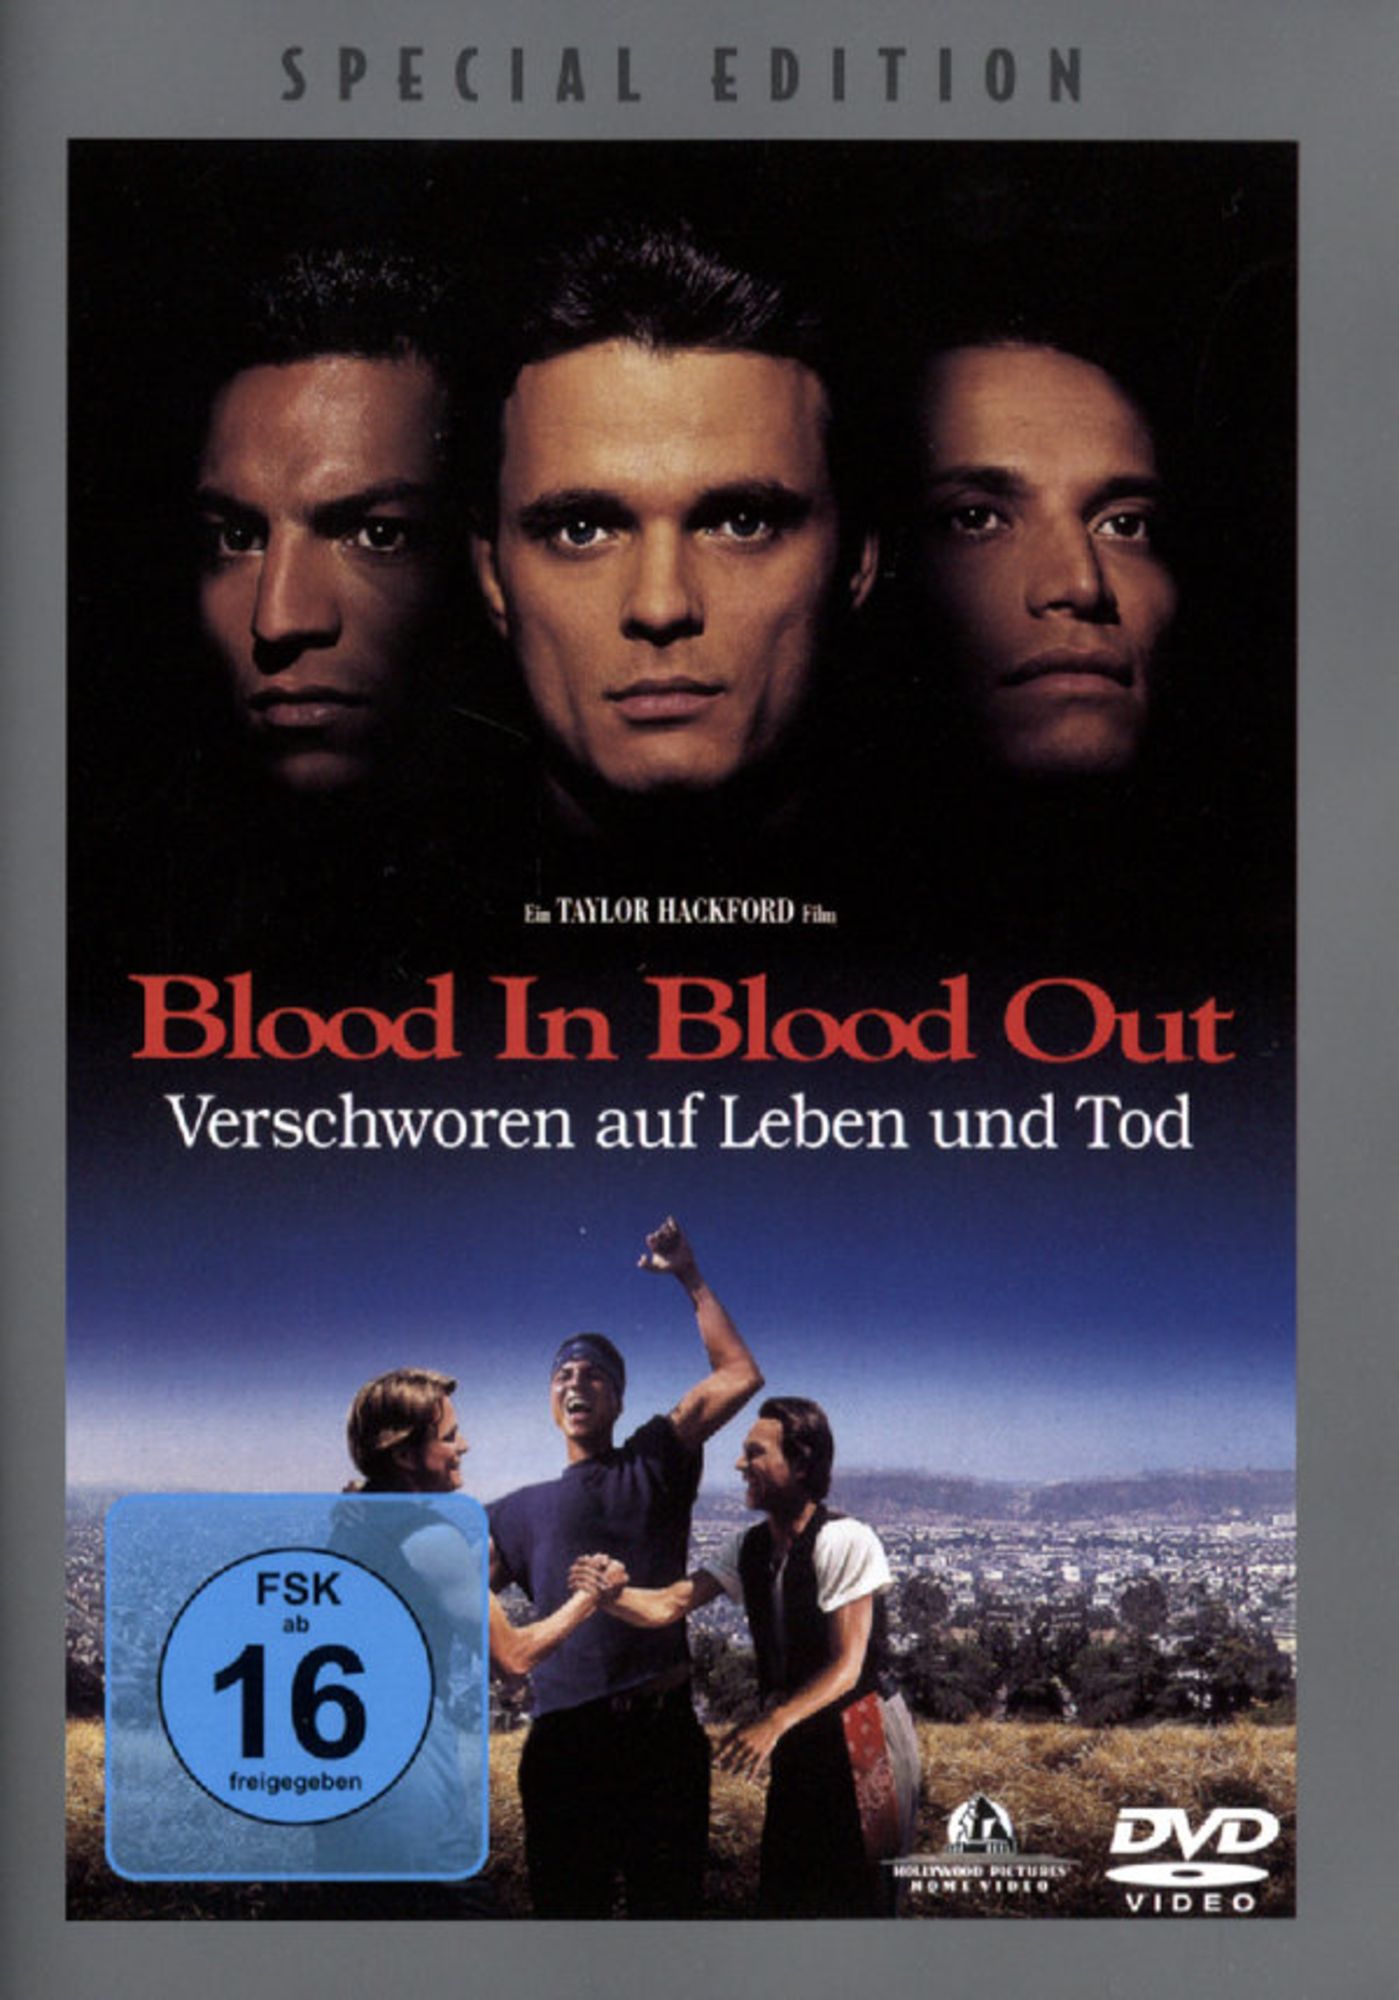 https://images.thalia.media/-/BF2000-2000/f942533f62b641abb452ebe2a851c072/blood-in-blood-out-special-edition-dvd-jesse-borrego.jpeg